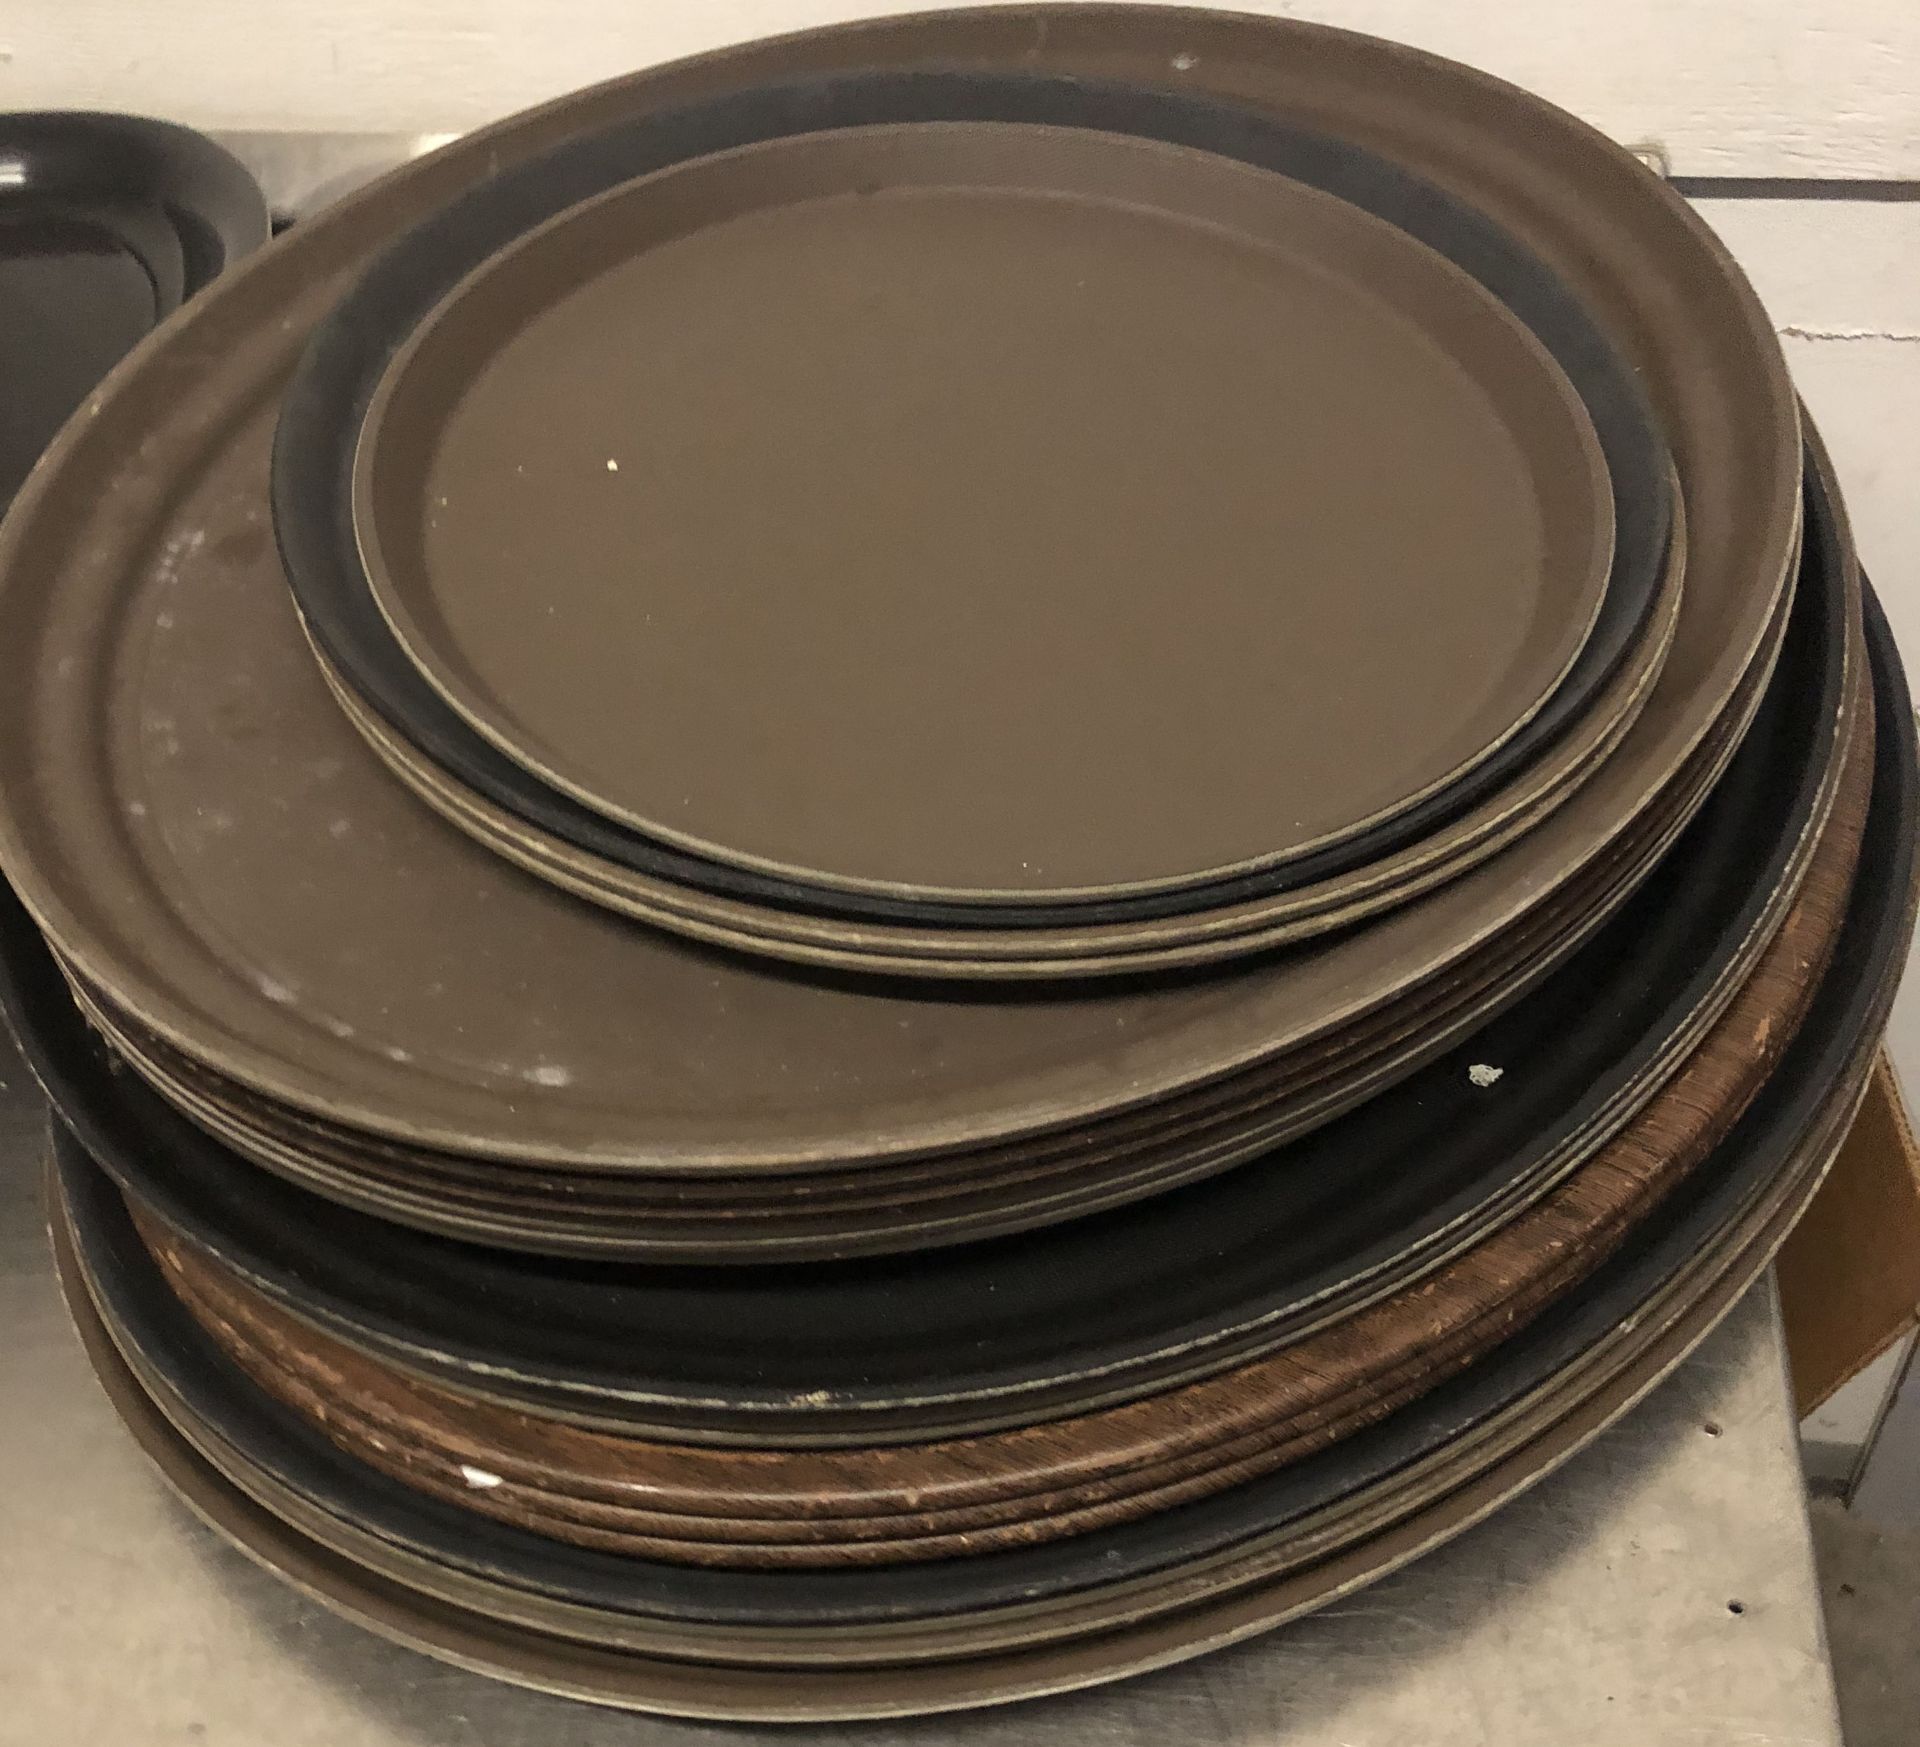 Lot 222 - lot of 22 serving trays of various sizes